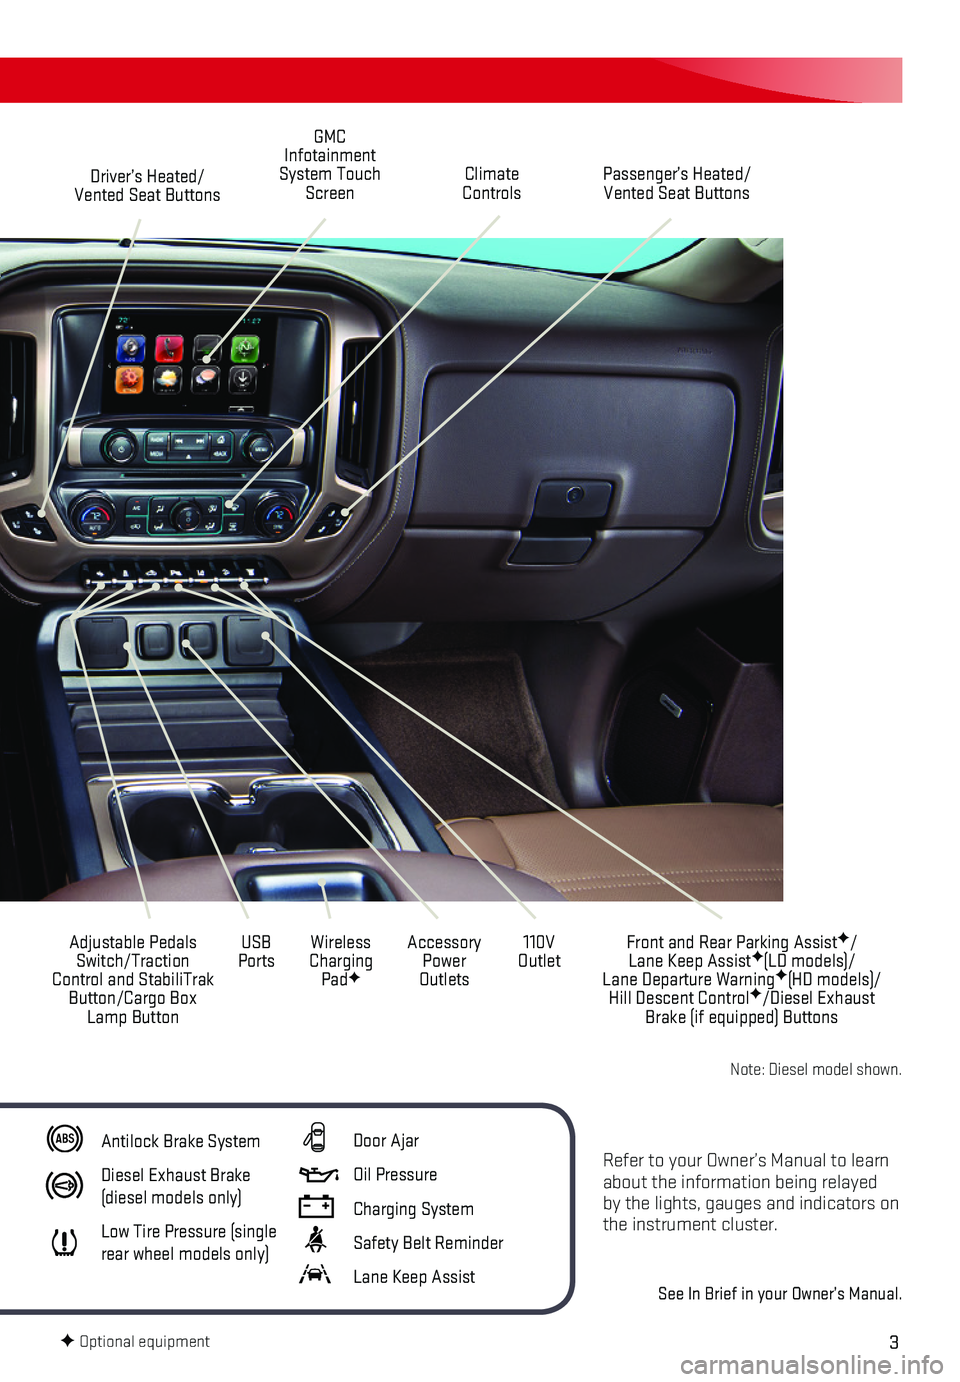 GMC SIERRA 2018  Get To Know Guide 3
Refer to your Owner’s Manual to learn about the information being relayed by the lights, gauges and indicators on the instrument cluster.
See In Brief in your Owner’s Manual.
Driver’s Heated/V